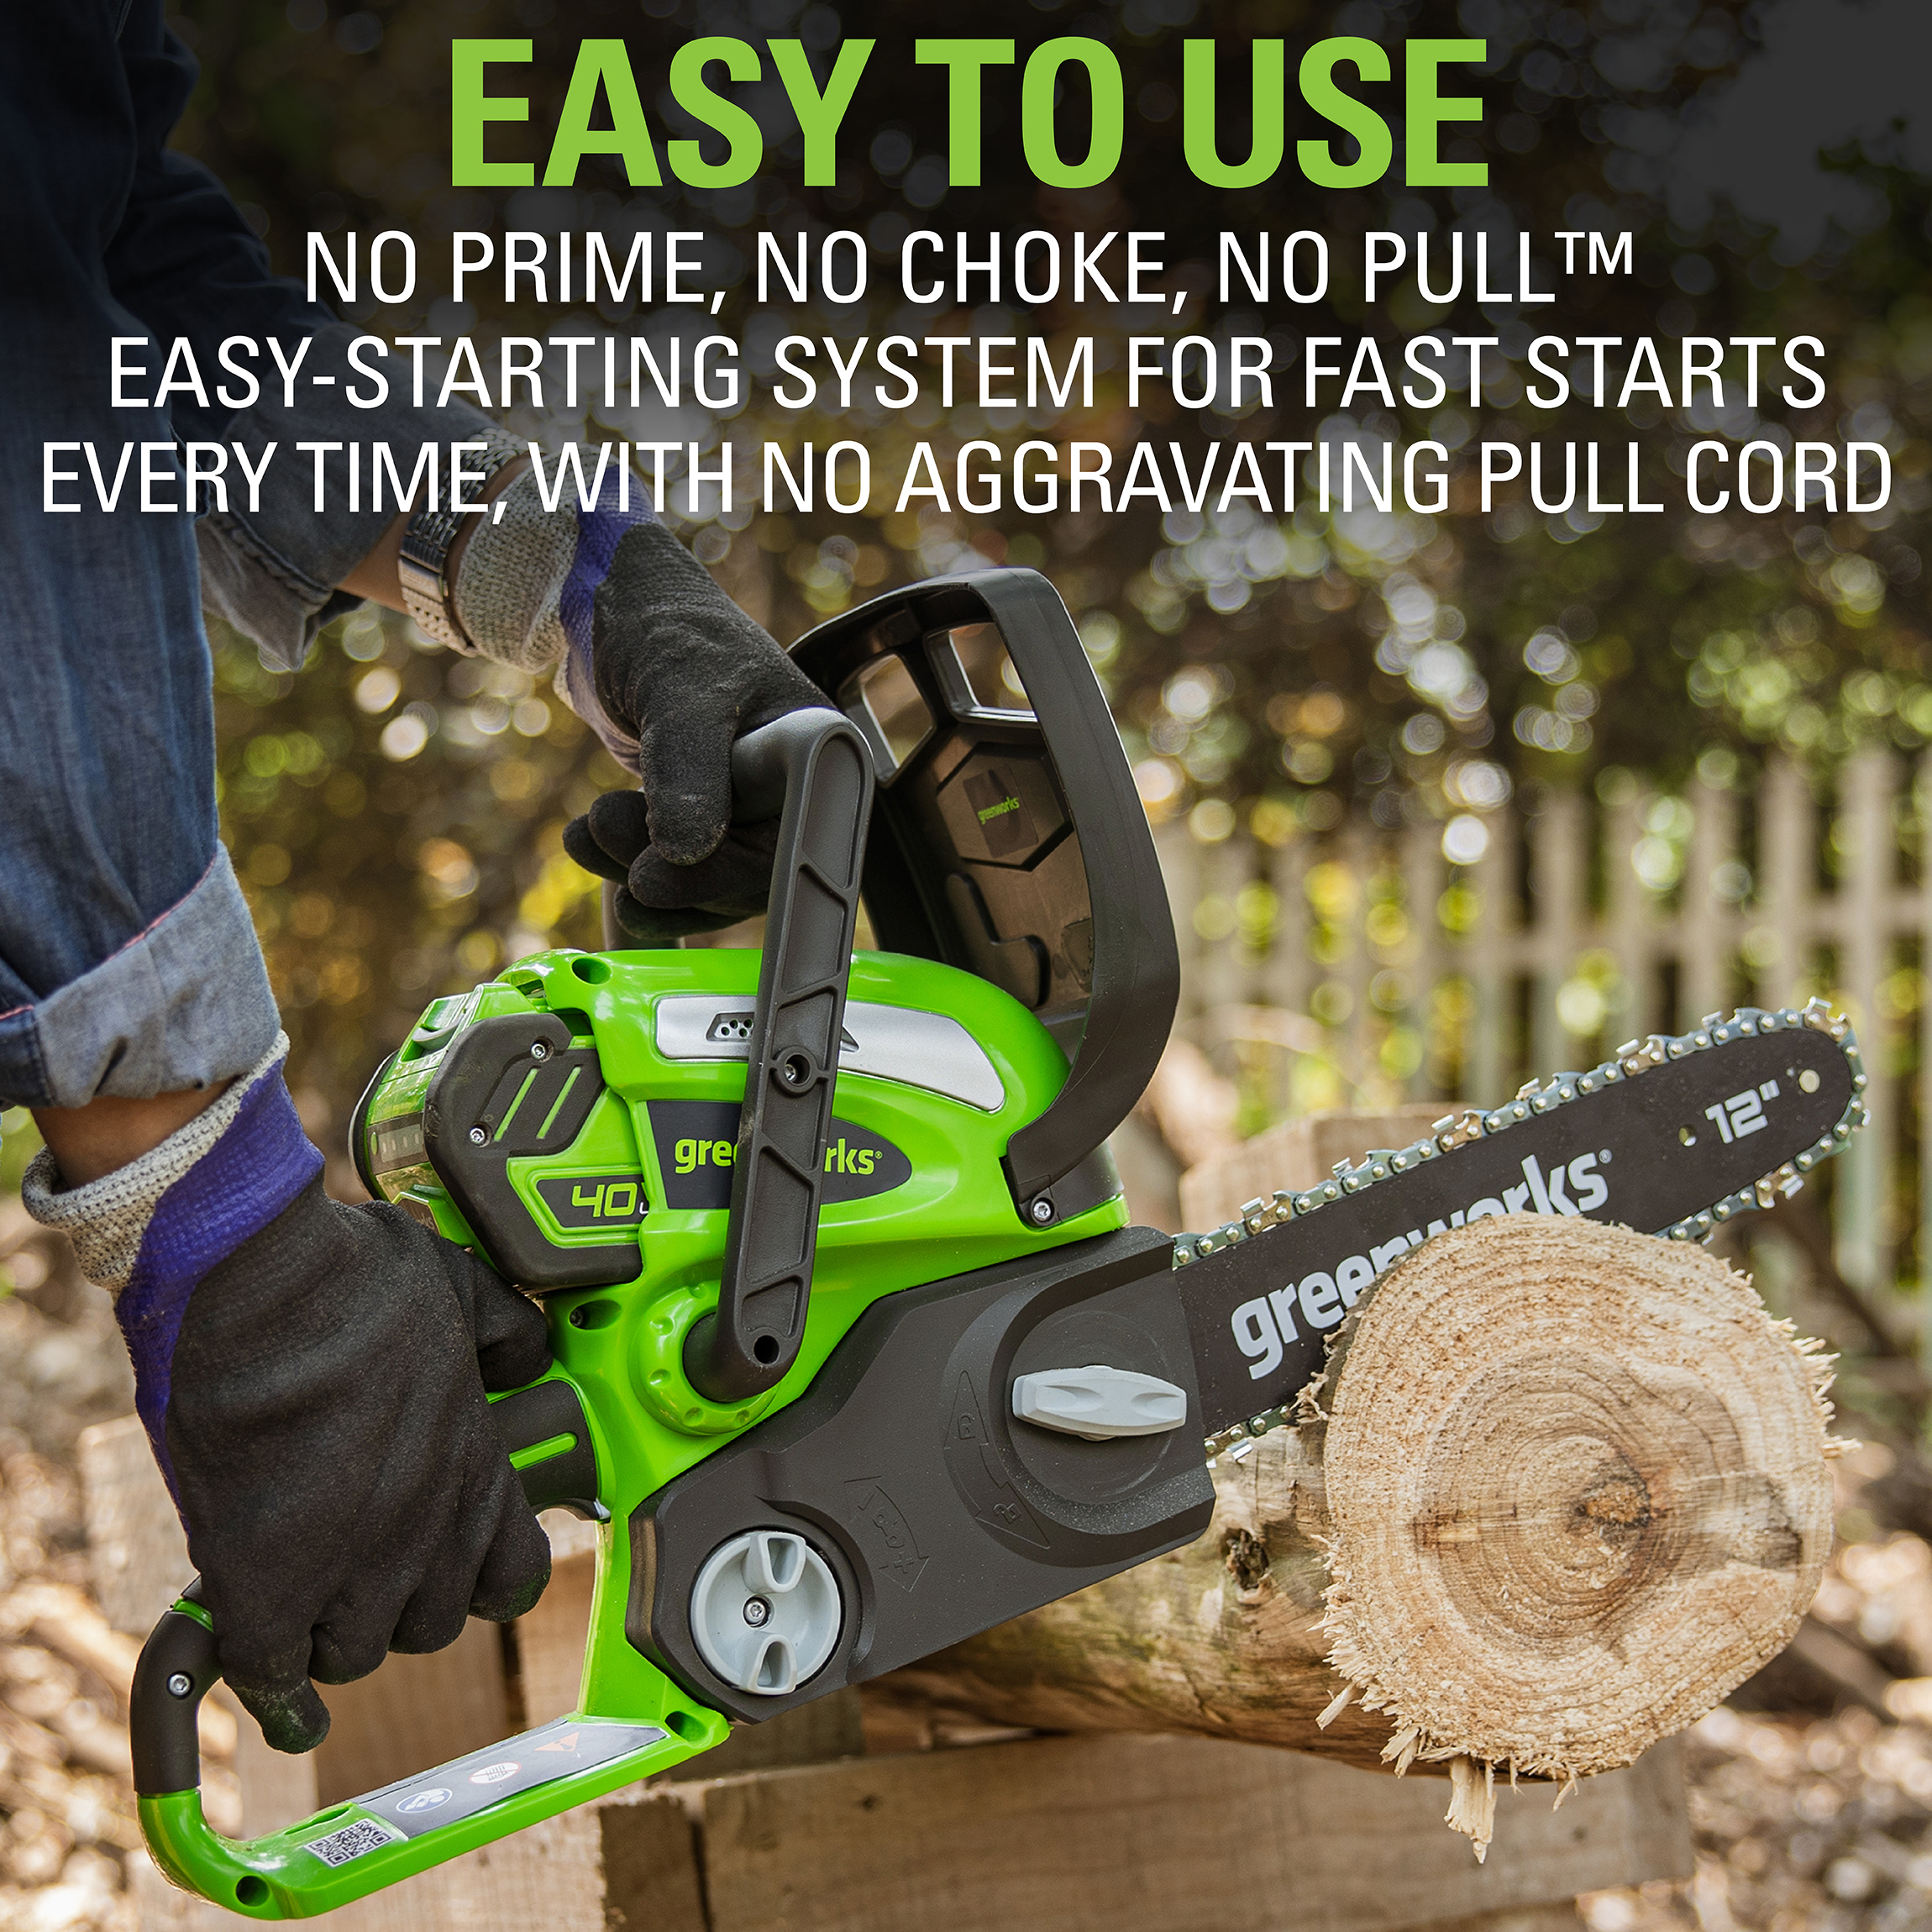 Greenworks 40V 12" Cordless Chainsaw with 2.0 Ah Battery & Charger, 20262 - image 8 of 14